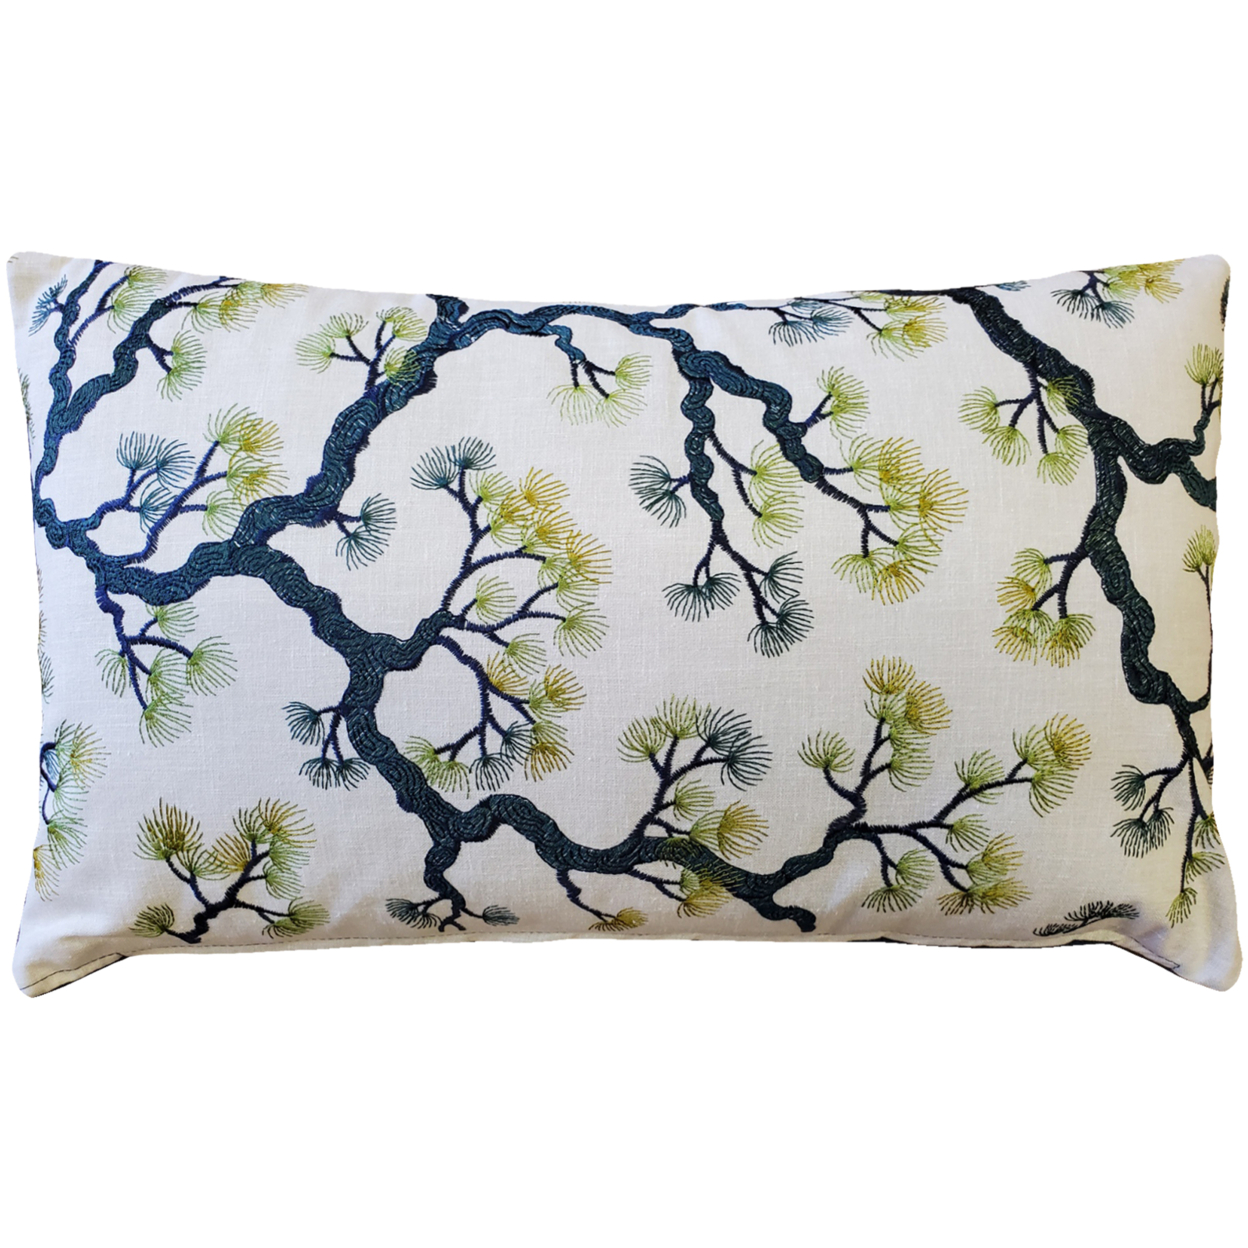 Bonsai Pine Teal Green Throw Pillow 12x19 Inches Square, Complete Pillow with Polyfill Pillow Insert